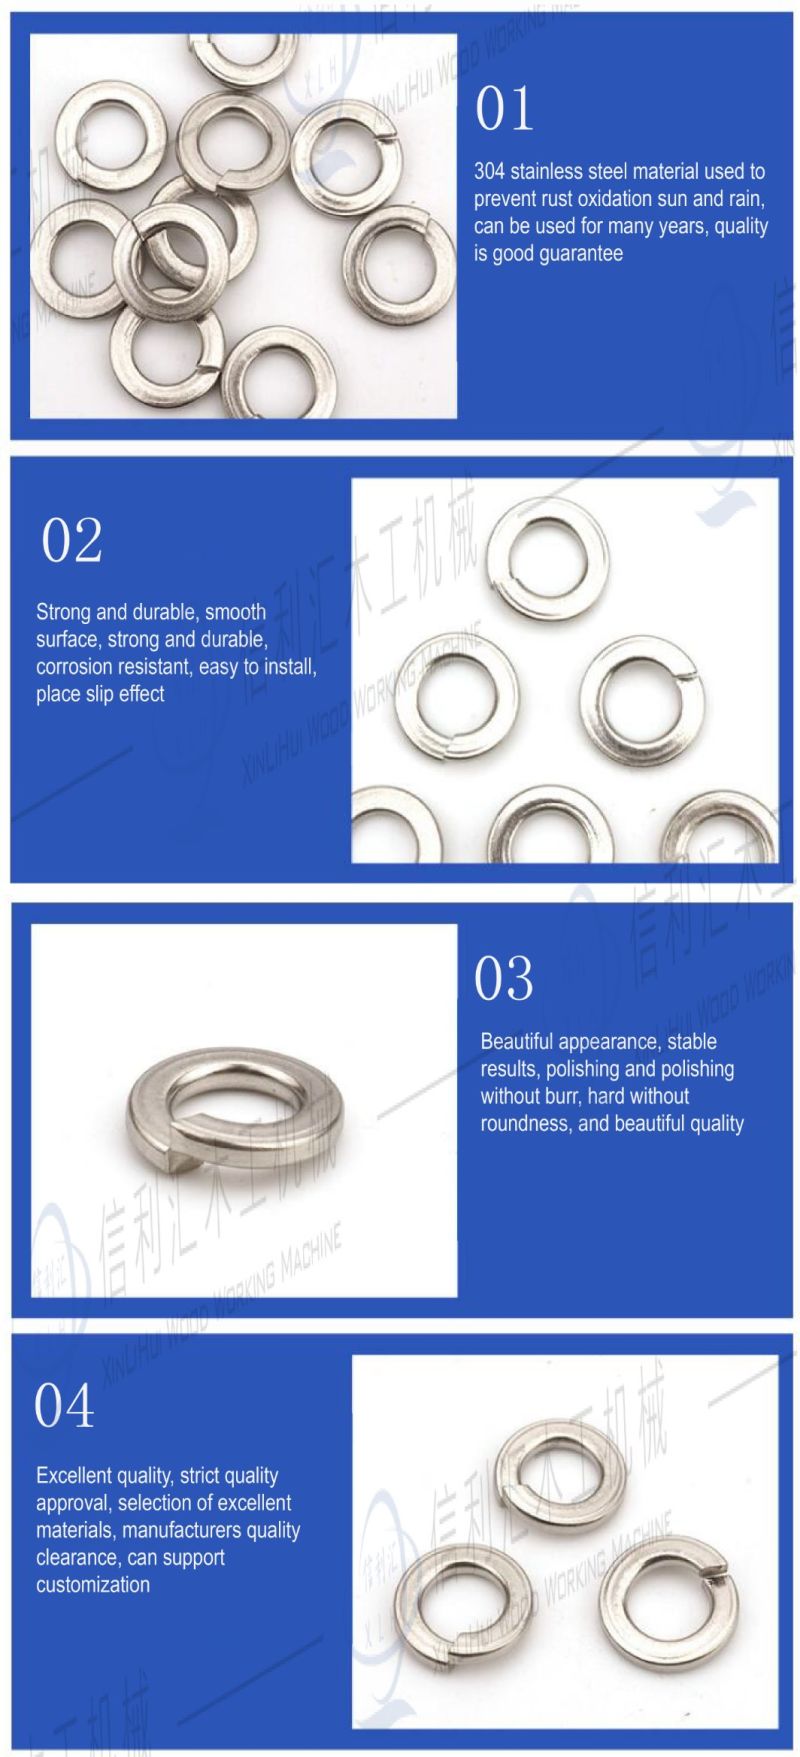 Spring Steel Stainless Steel Self-Lock Washer DIN25201 M3-M100 Single Coil Spring Lock Washer with GB93 DIN127 Standard Used in Automotive Industry,